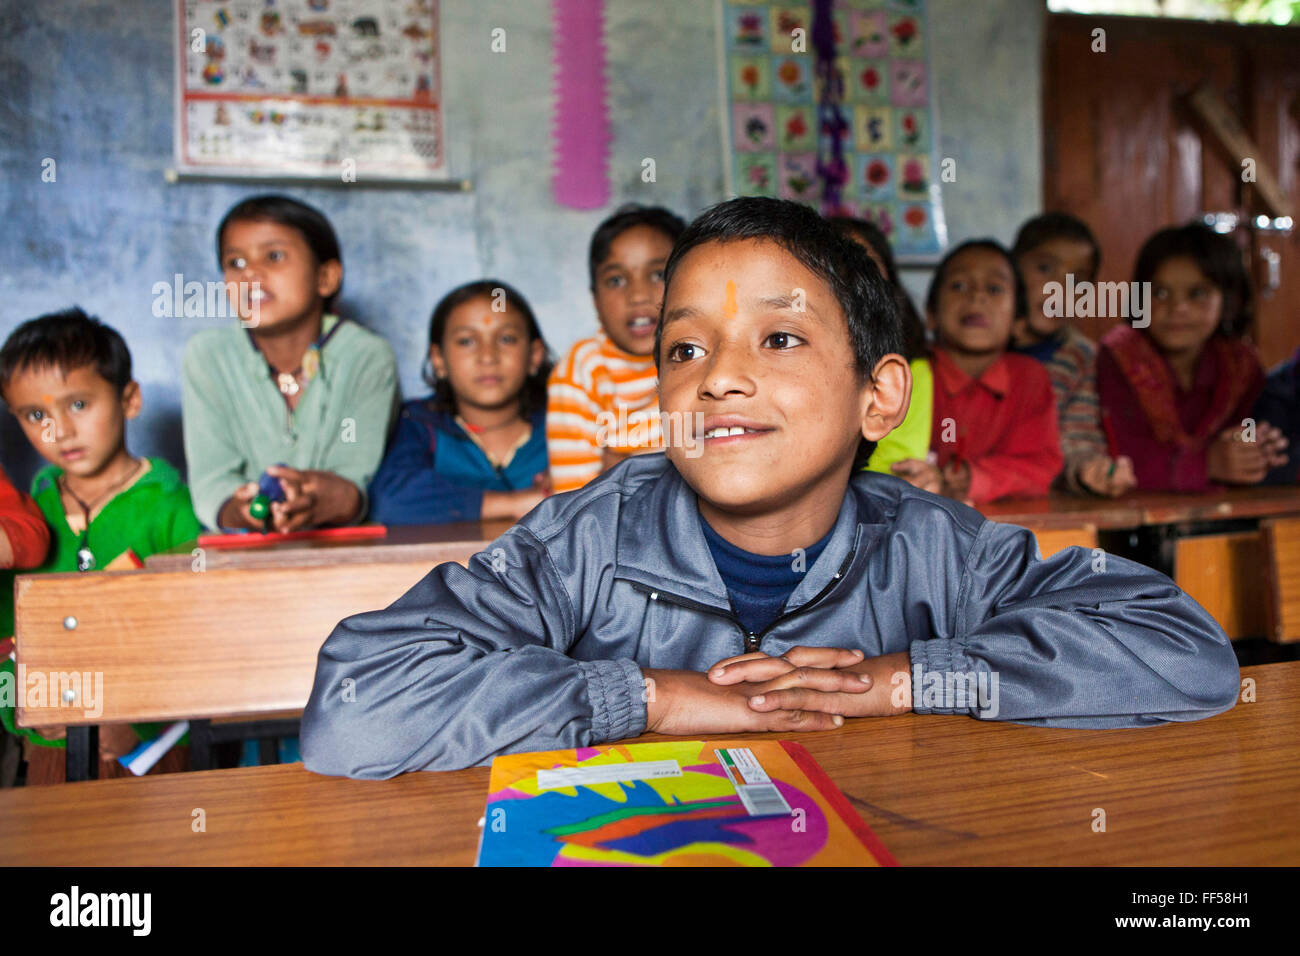 A boy in a lesson at the Alternate Learning Hub, Subhai, Himalayas, India. The school is organized and funded by the Pragya charity.  Pragya is a non-profit organization providing education and information services in high altitude areas in the Himalayas. Stock Photo